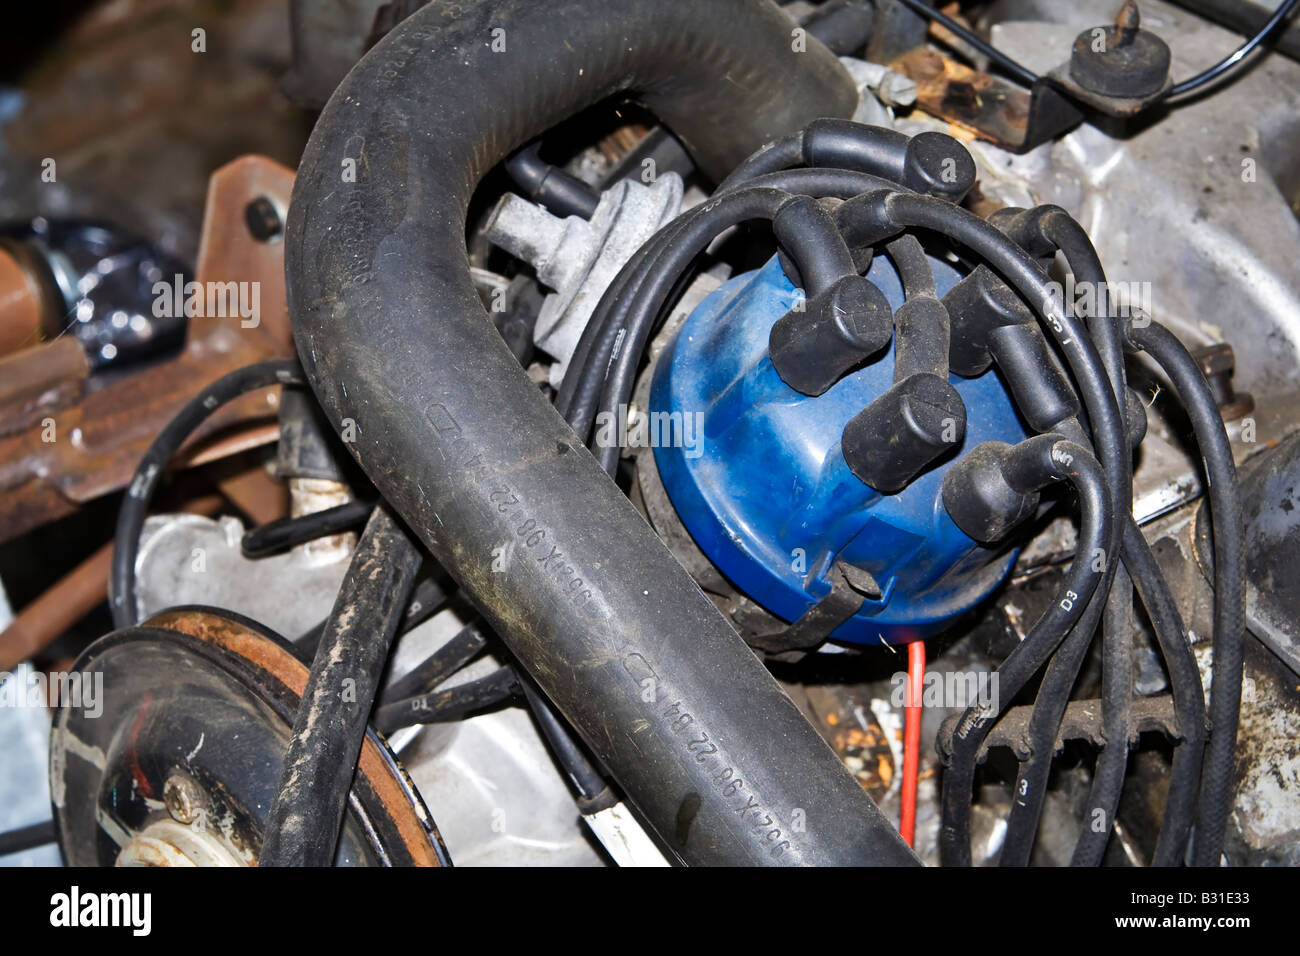 Car Distributor Cap High Resolution Stock Photography and Images - Alamy